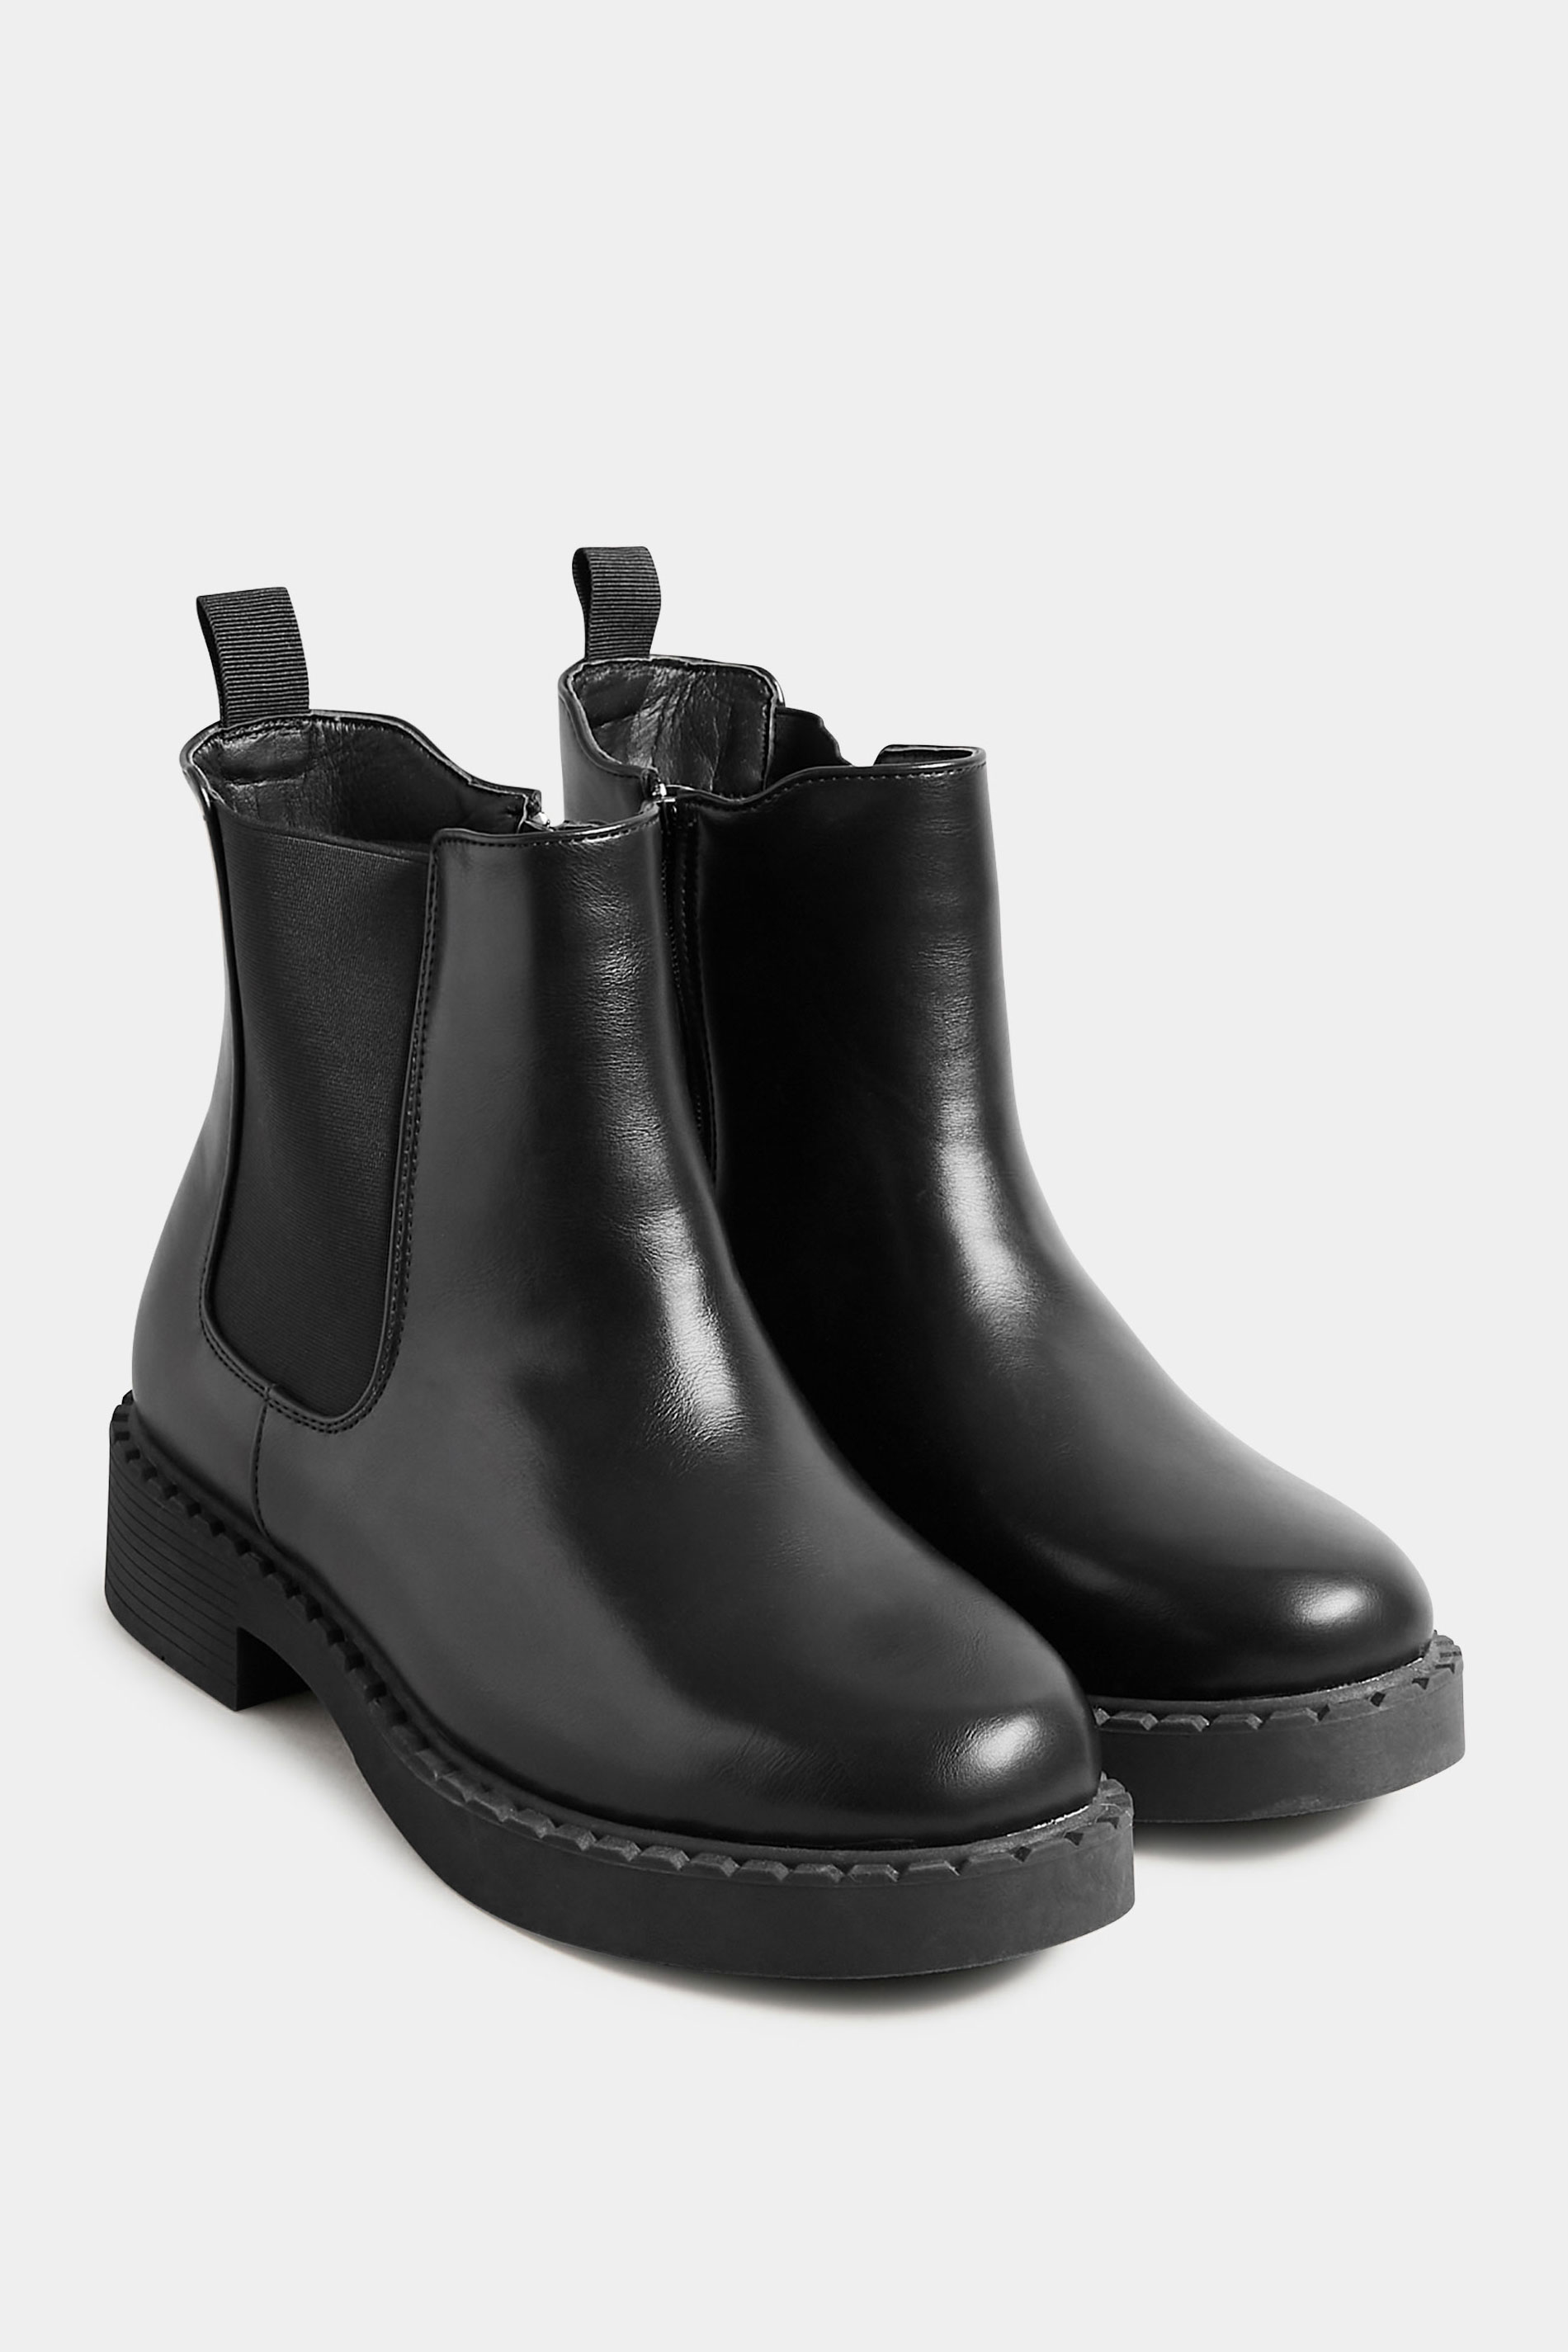 LIMITED COLLECTION Black Faux Leather Chelsea Boots In Extra Wide EEE Fit | Yours Clothing 2